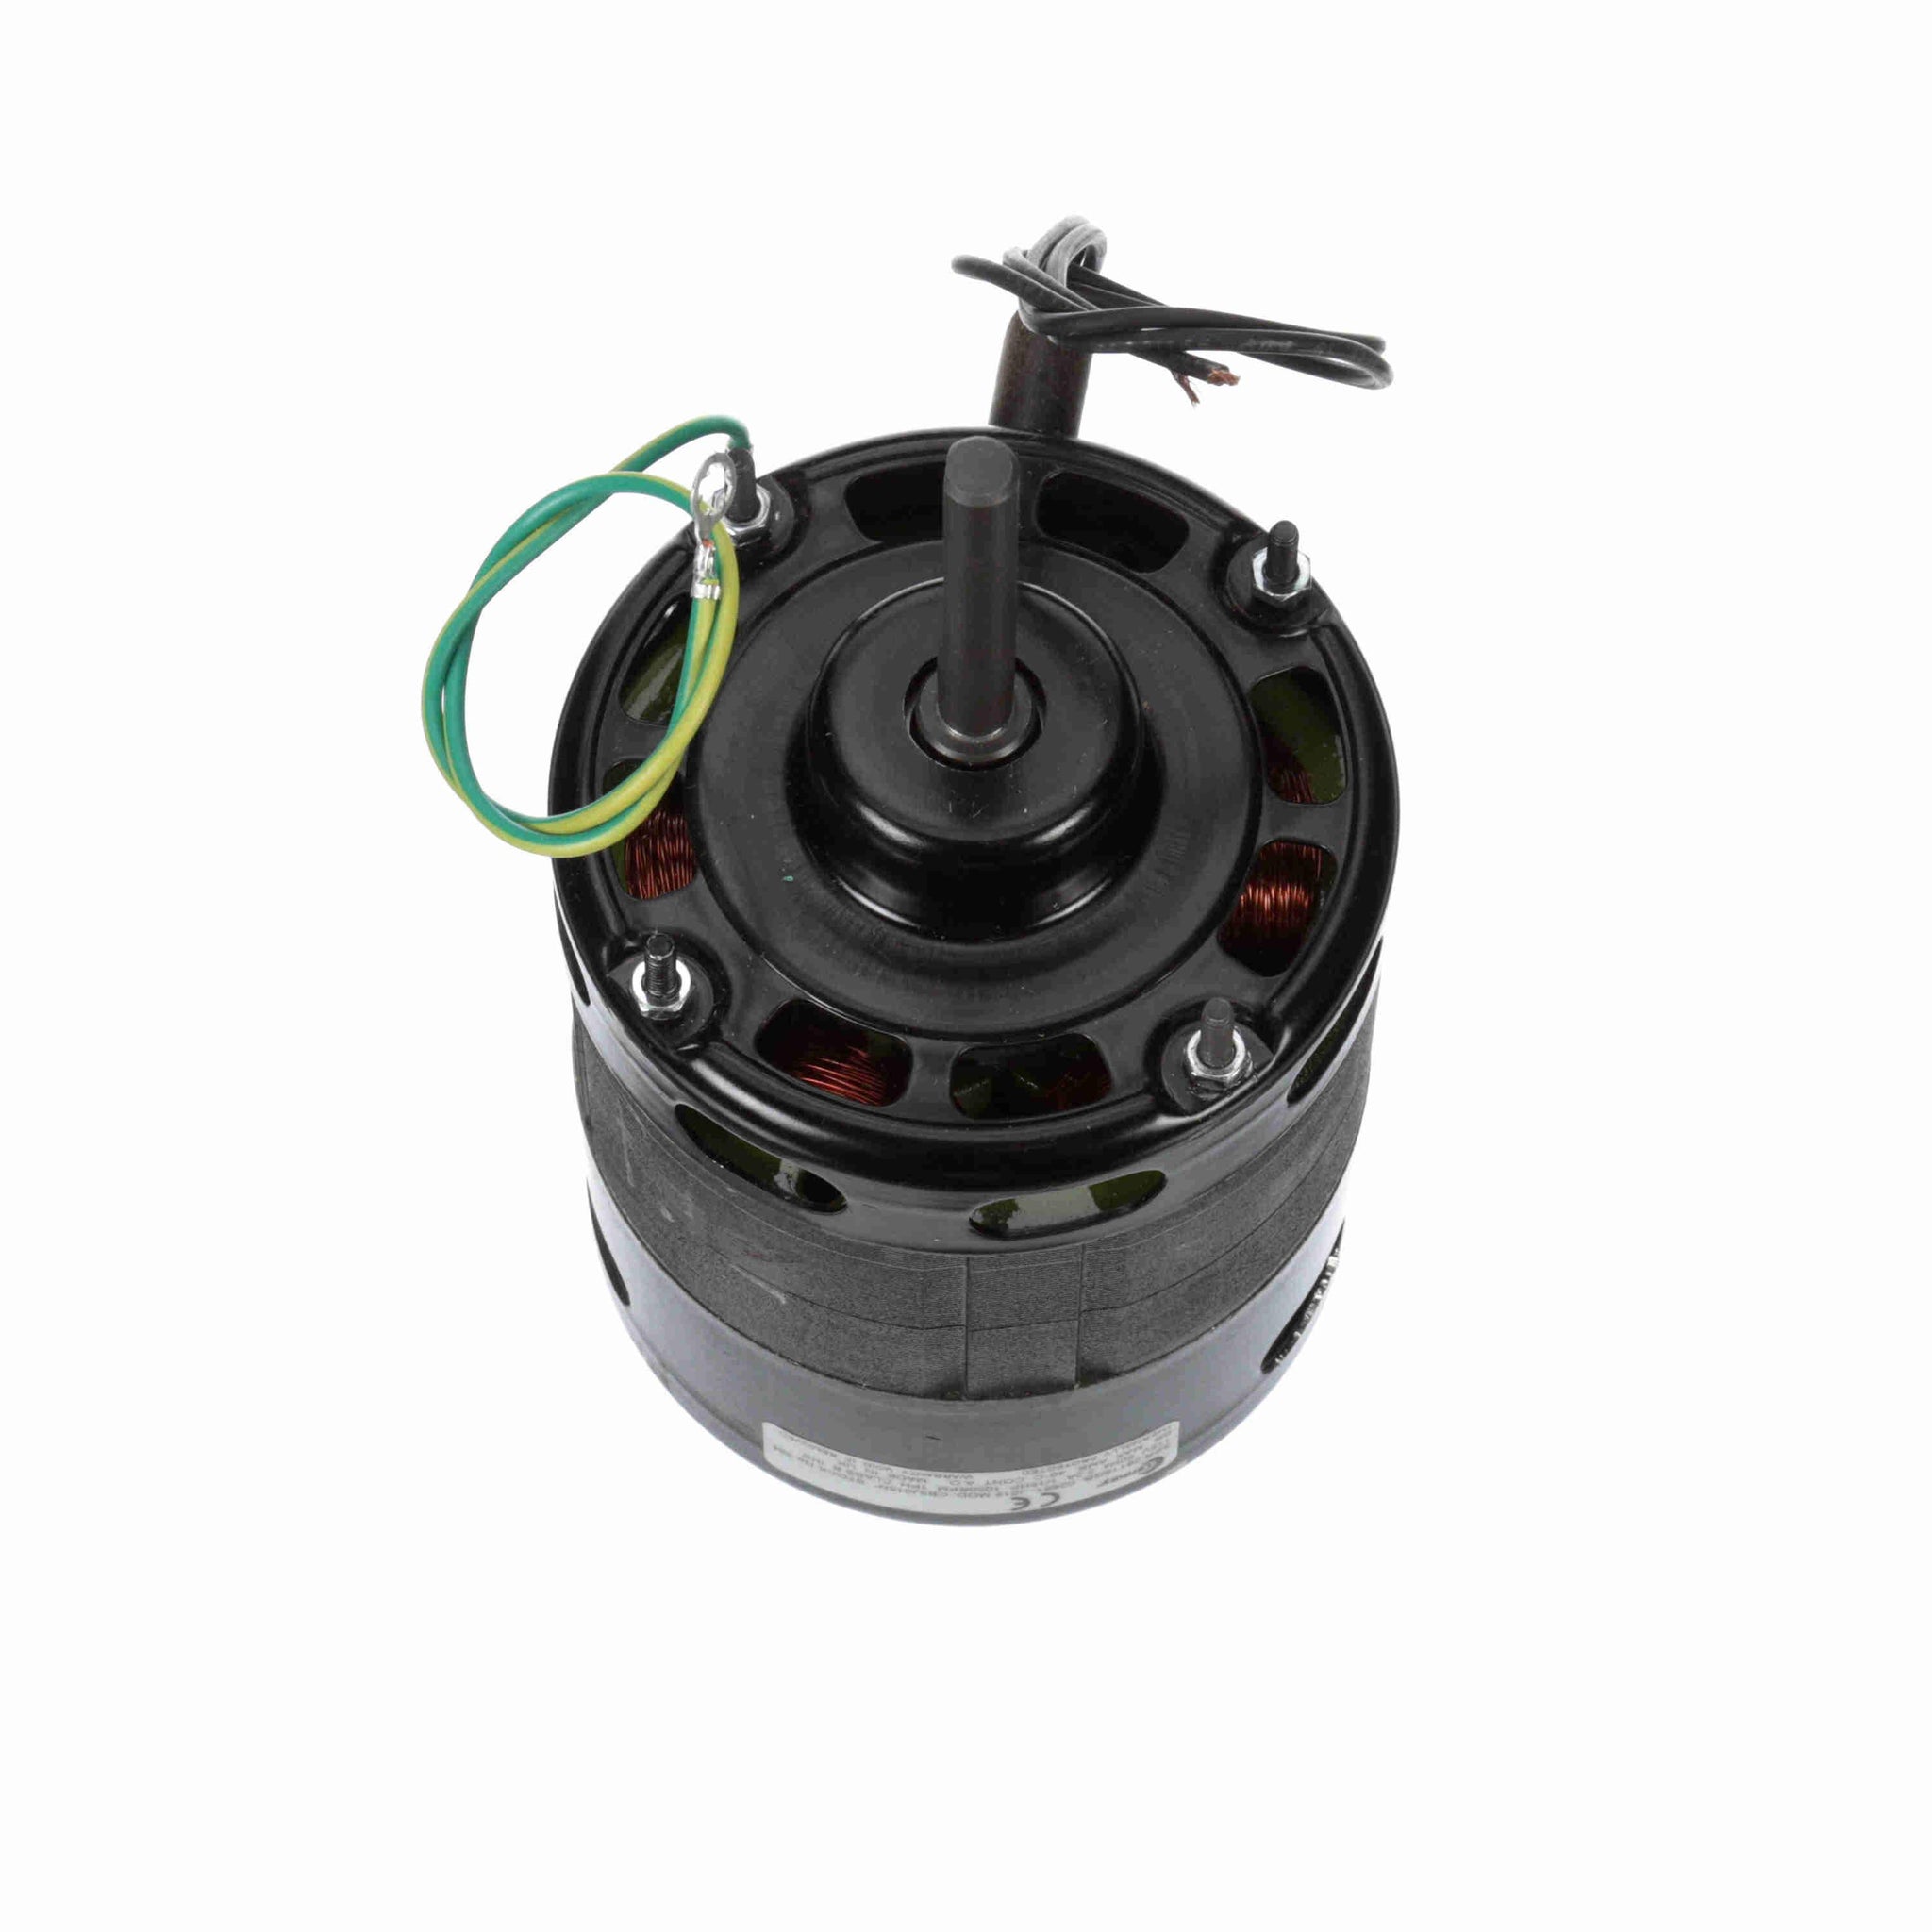 394 -  1/15 HP OEM Replacement Motor, 1050 RPM, 115 Volts, 4.3